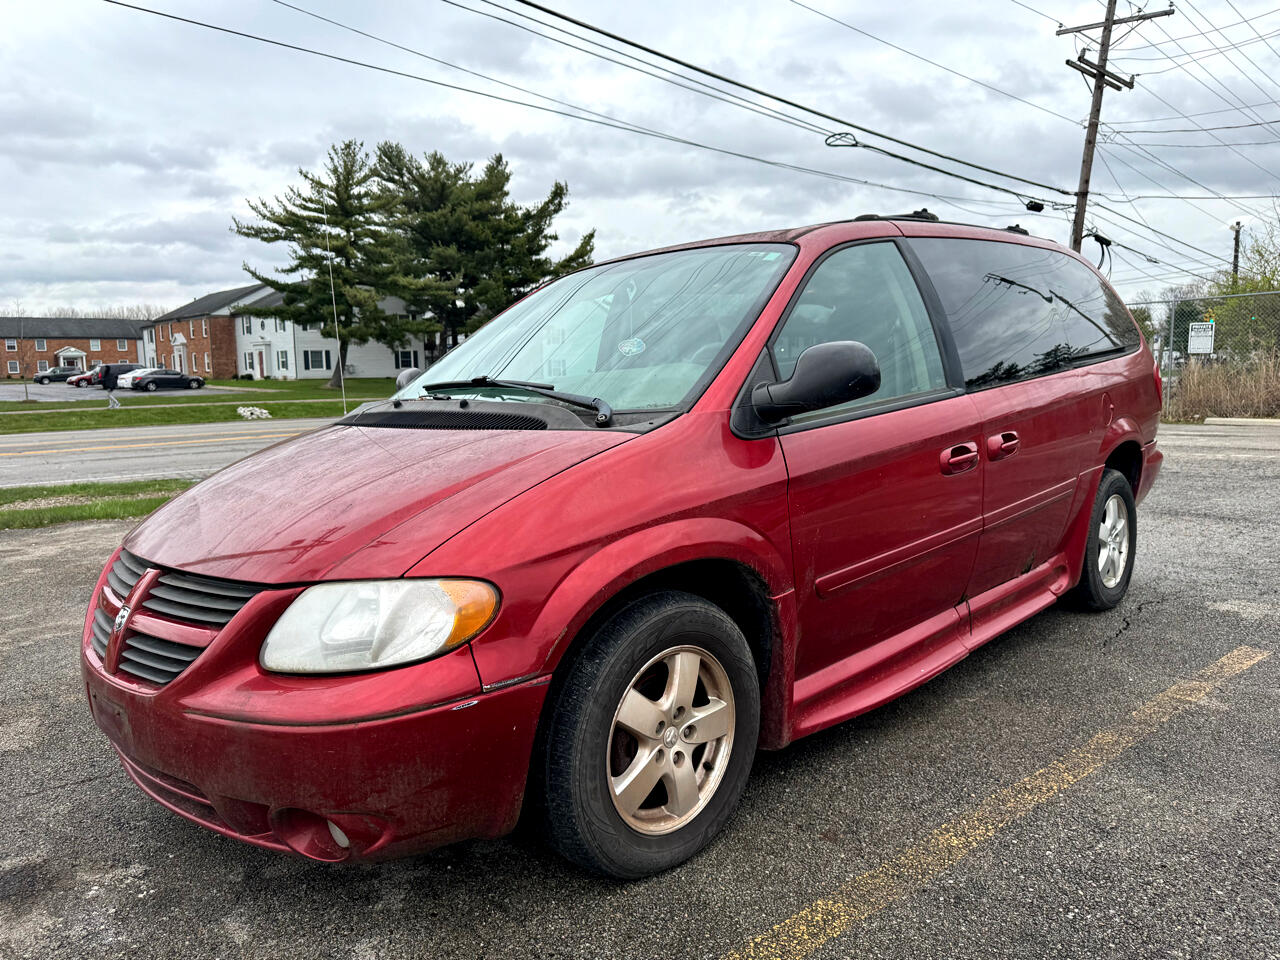 Used 2005 Dodge Grand Caravan SXT with VIN 2D4GP44LX5R534208 for sale in Columbus, OH